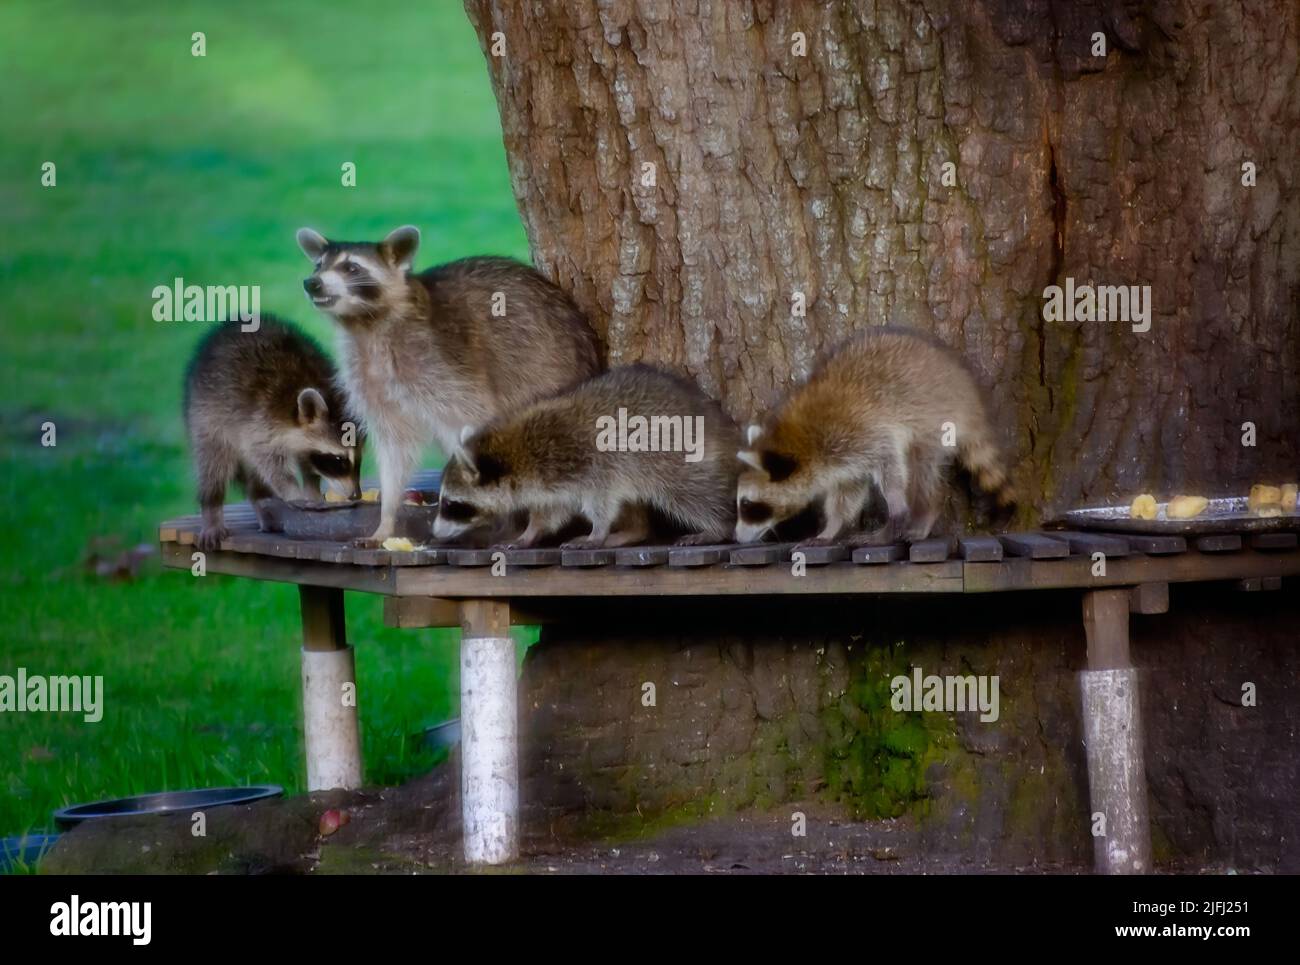 A mother raccoon and her babies eat at a backyard wildlife feeding station, July13, 2021, in Coden, Alabama. Stock Photo